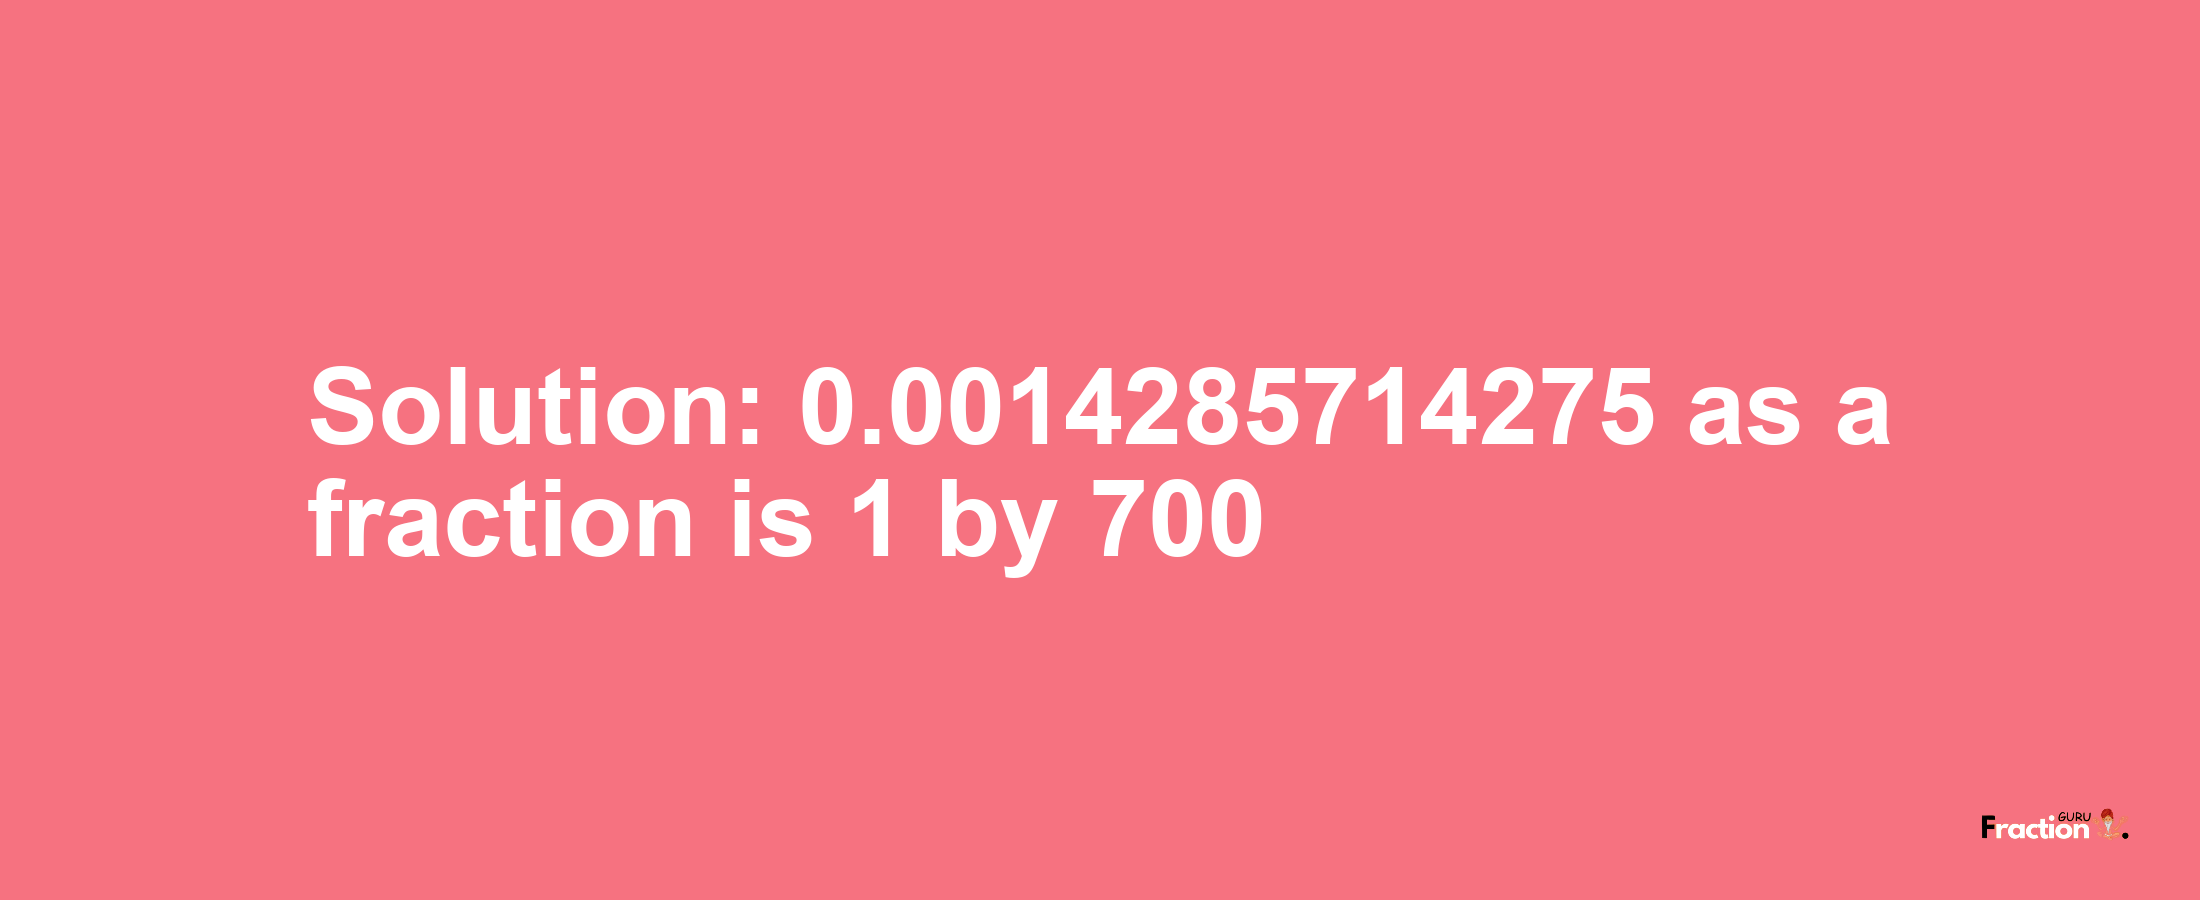 Solution:0.0014285714275 as a fraction is 1/700